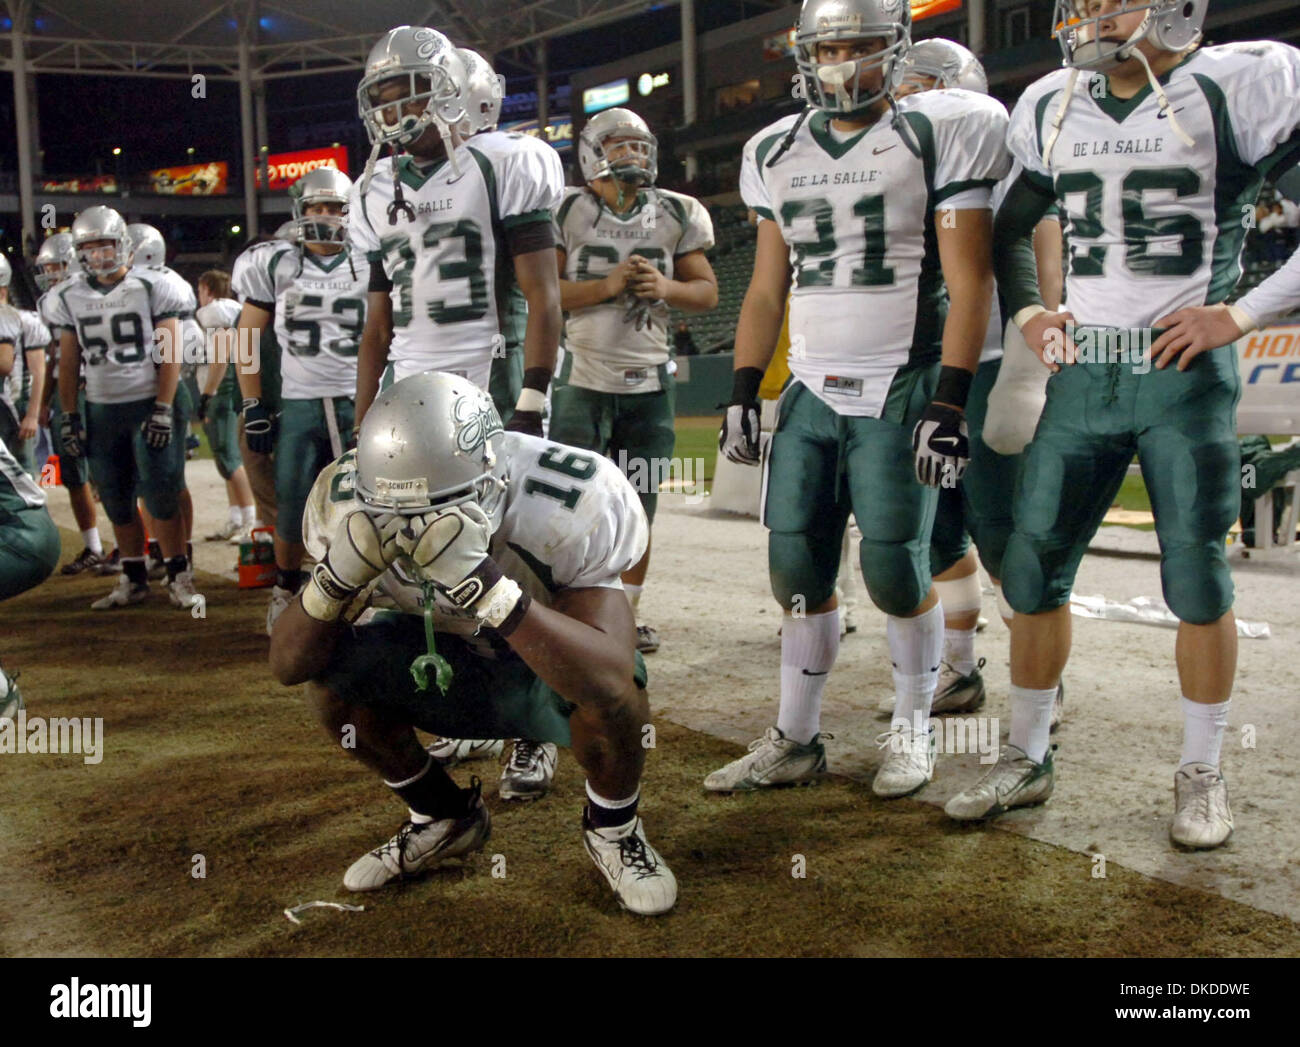 Dec 16, 2006; Carson, CA, USA; PAUL WRIGHT #16 and his De La Salle team mates watch their dream for a state title go down in defeat to Canyon 27-13 in the California Interscholastic Federation Division I State Bowl Championship game in Carson, Calif. Dec. 16, 2006.  Mandatory Credit: Photo by Karl Mondon/Contra Costa Times/ZUMA Press. (©) Copyright 2006 by Contra Costa Times Stock Photo